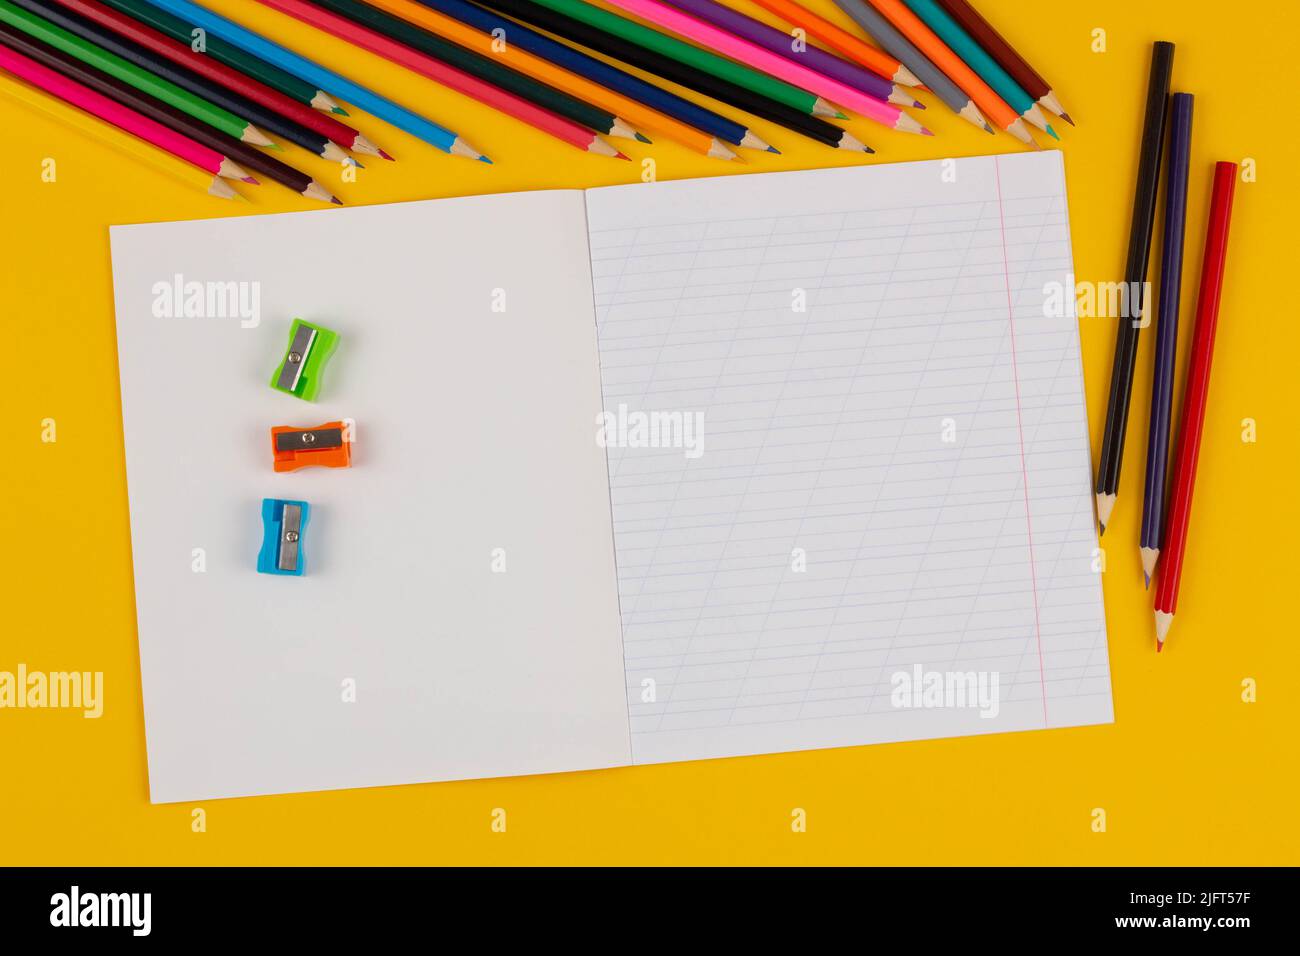 School notebook on a yellow background with copy space text, colorful pencils, pencil sharpeners. Back to school. Blank sheet of paper with oblique Stock Photo